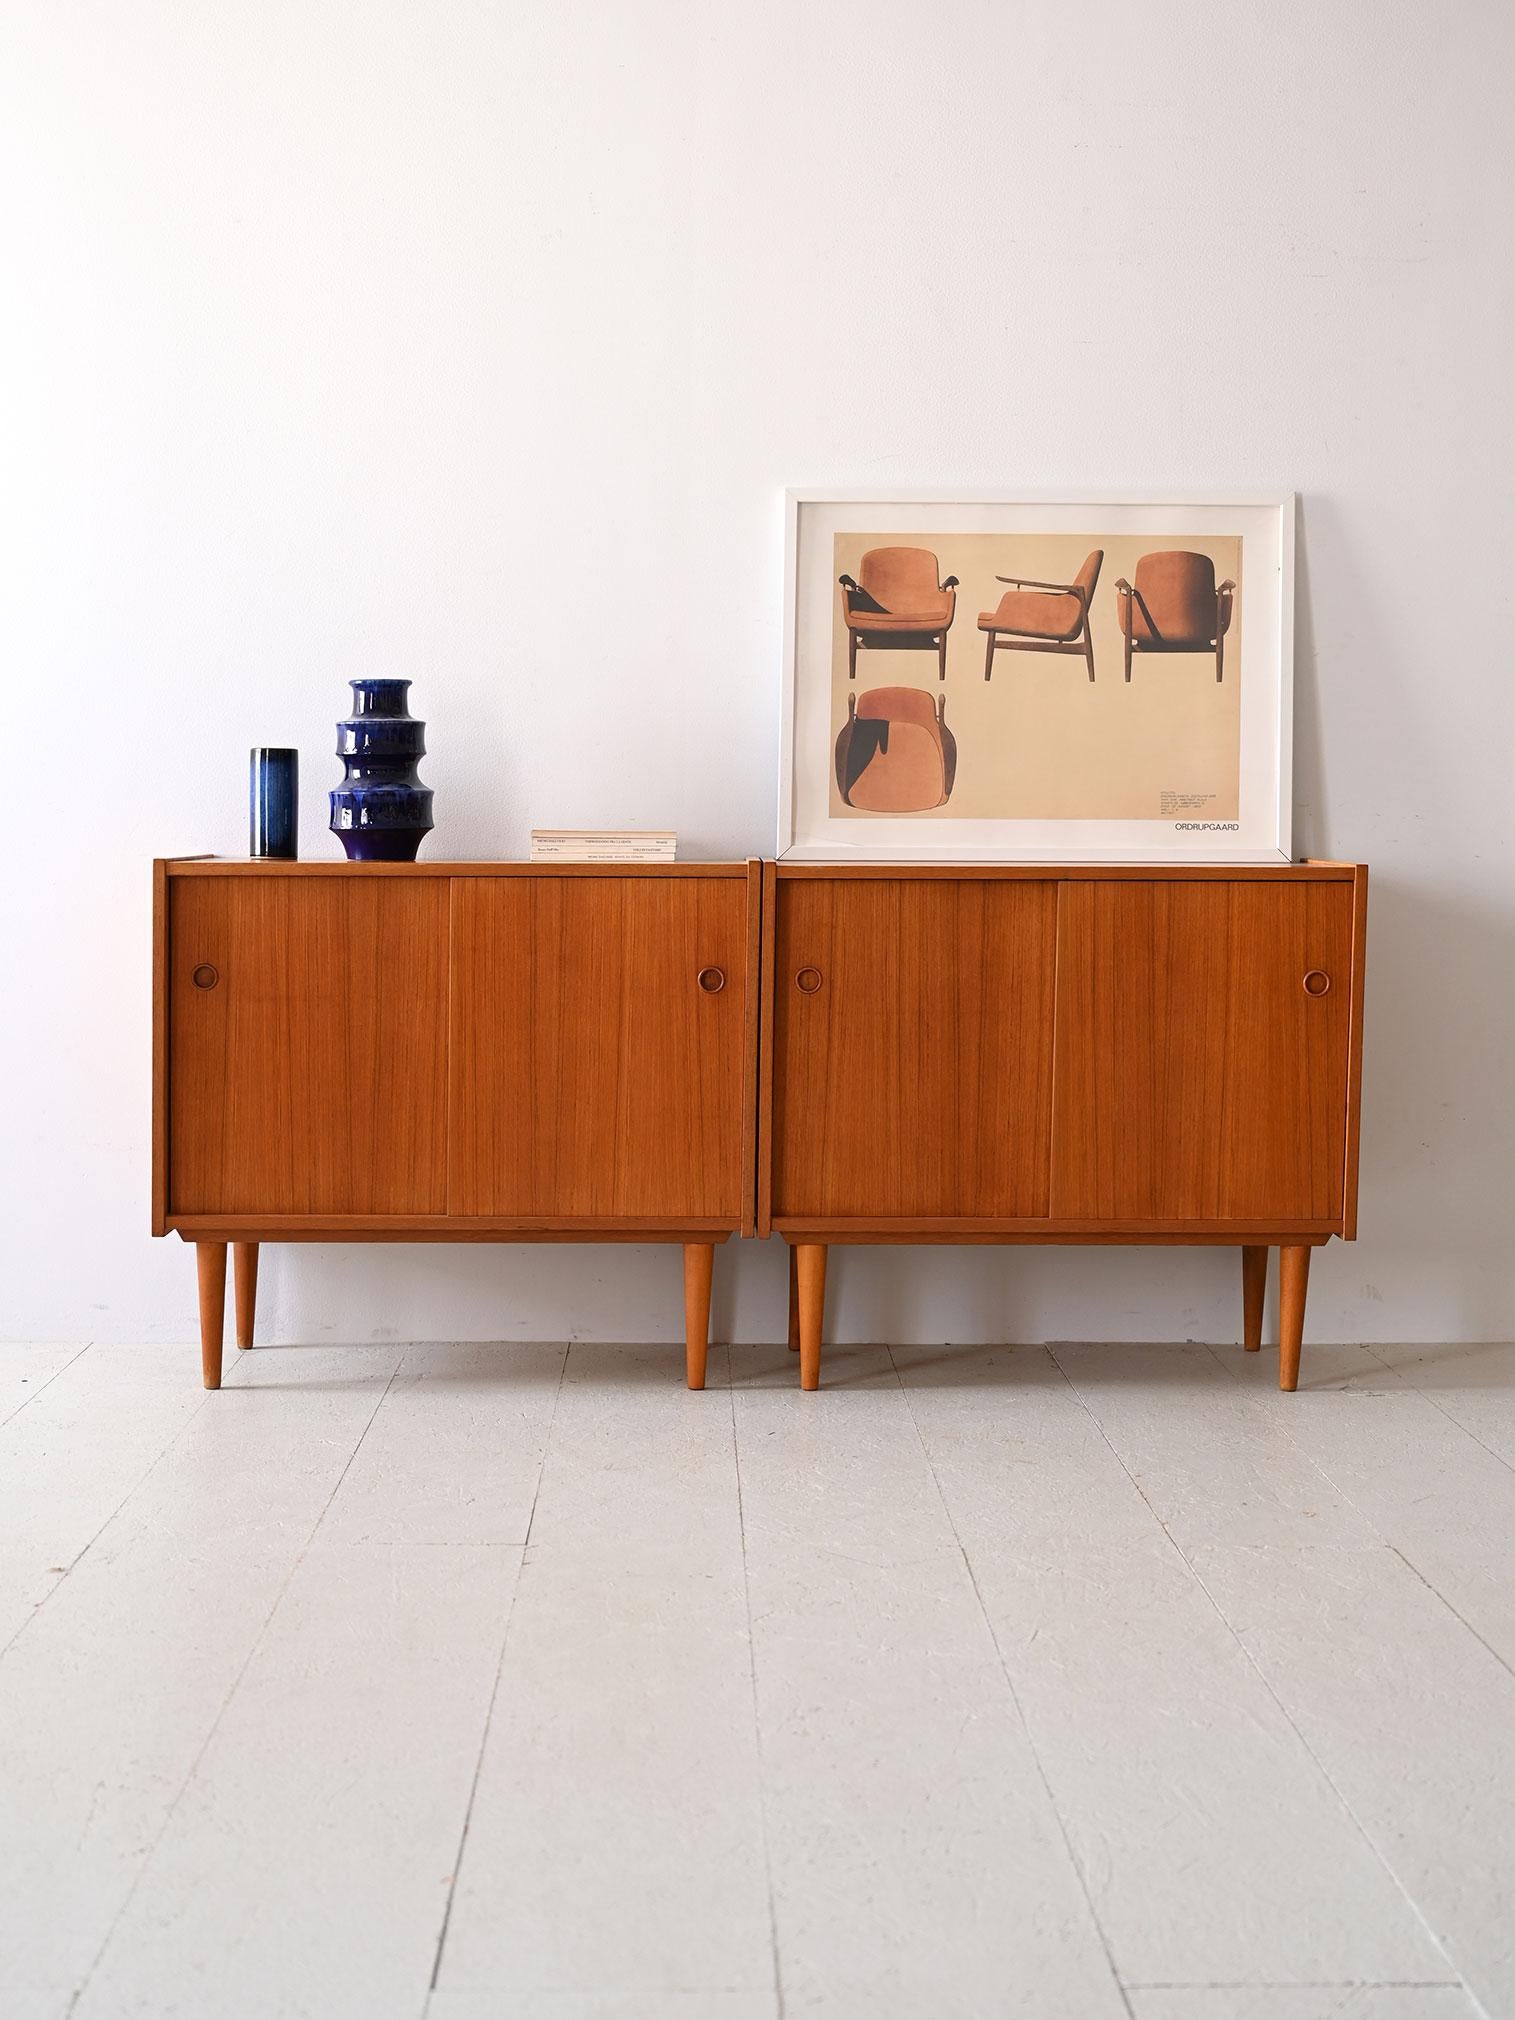 Vintage teak sideboards with sliding doors.

This pair of 1960s cabinets reflects Scandinavian design in its purest essence. Each cabinet features a compartment with a shelf inside, optimal for organizing and hiding everyday items.
Smooth wood